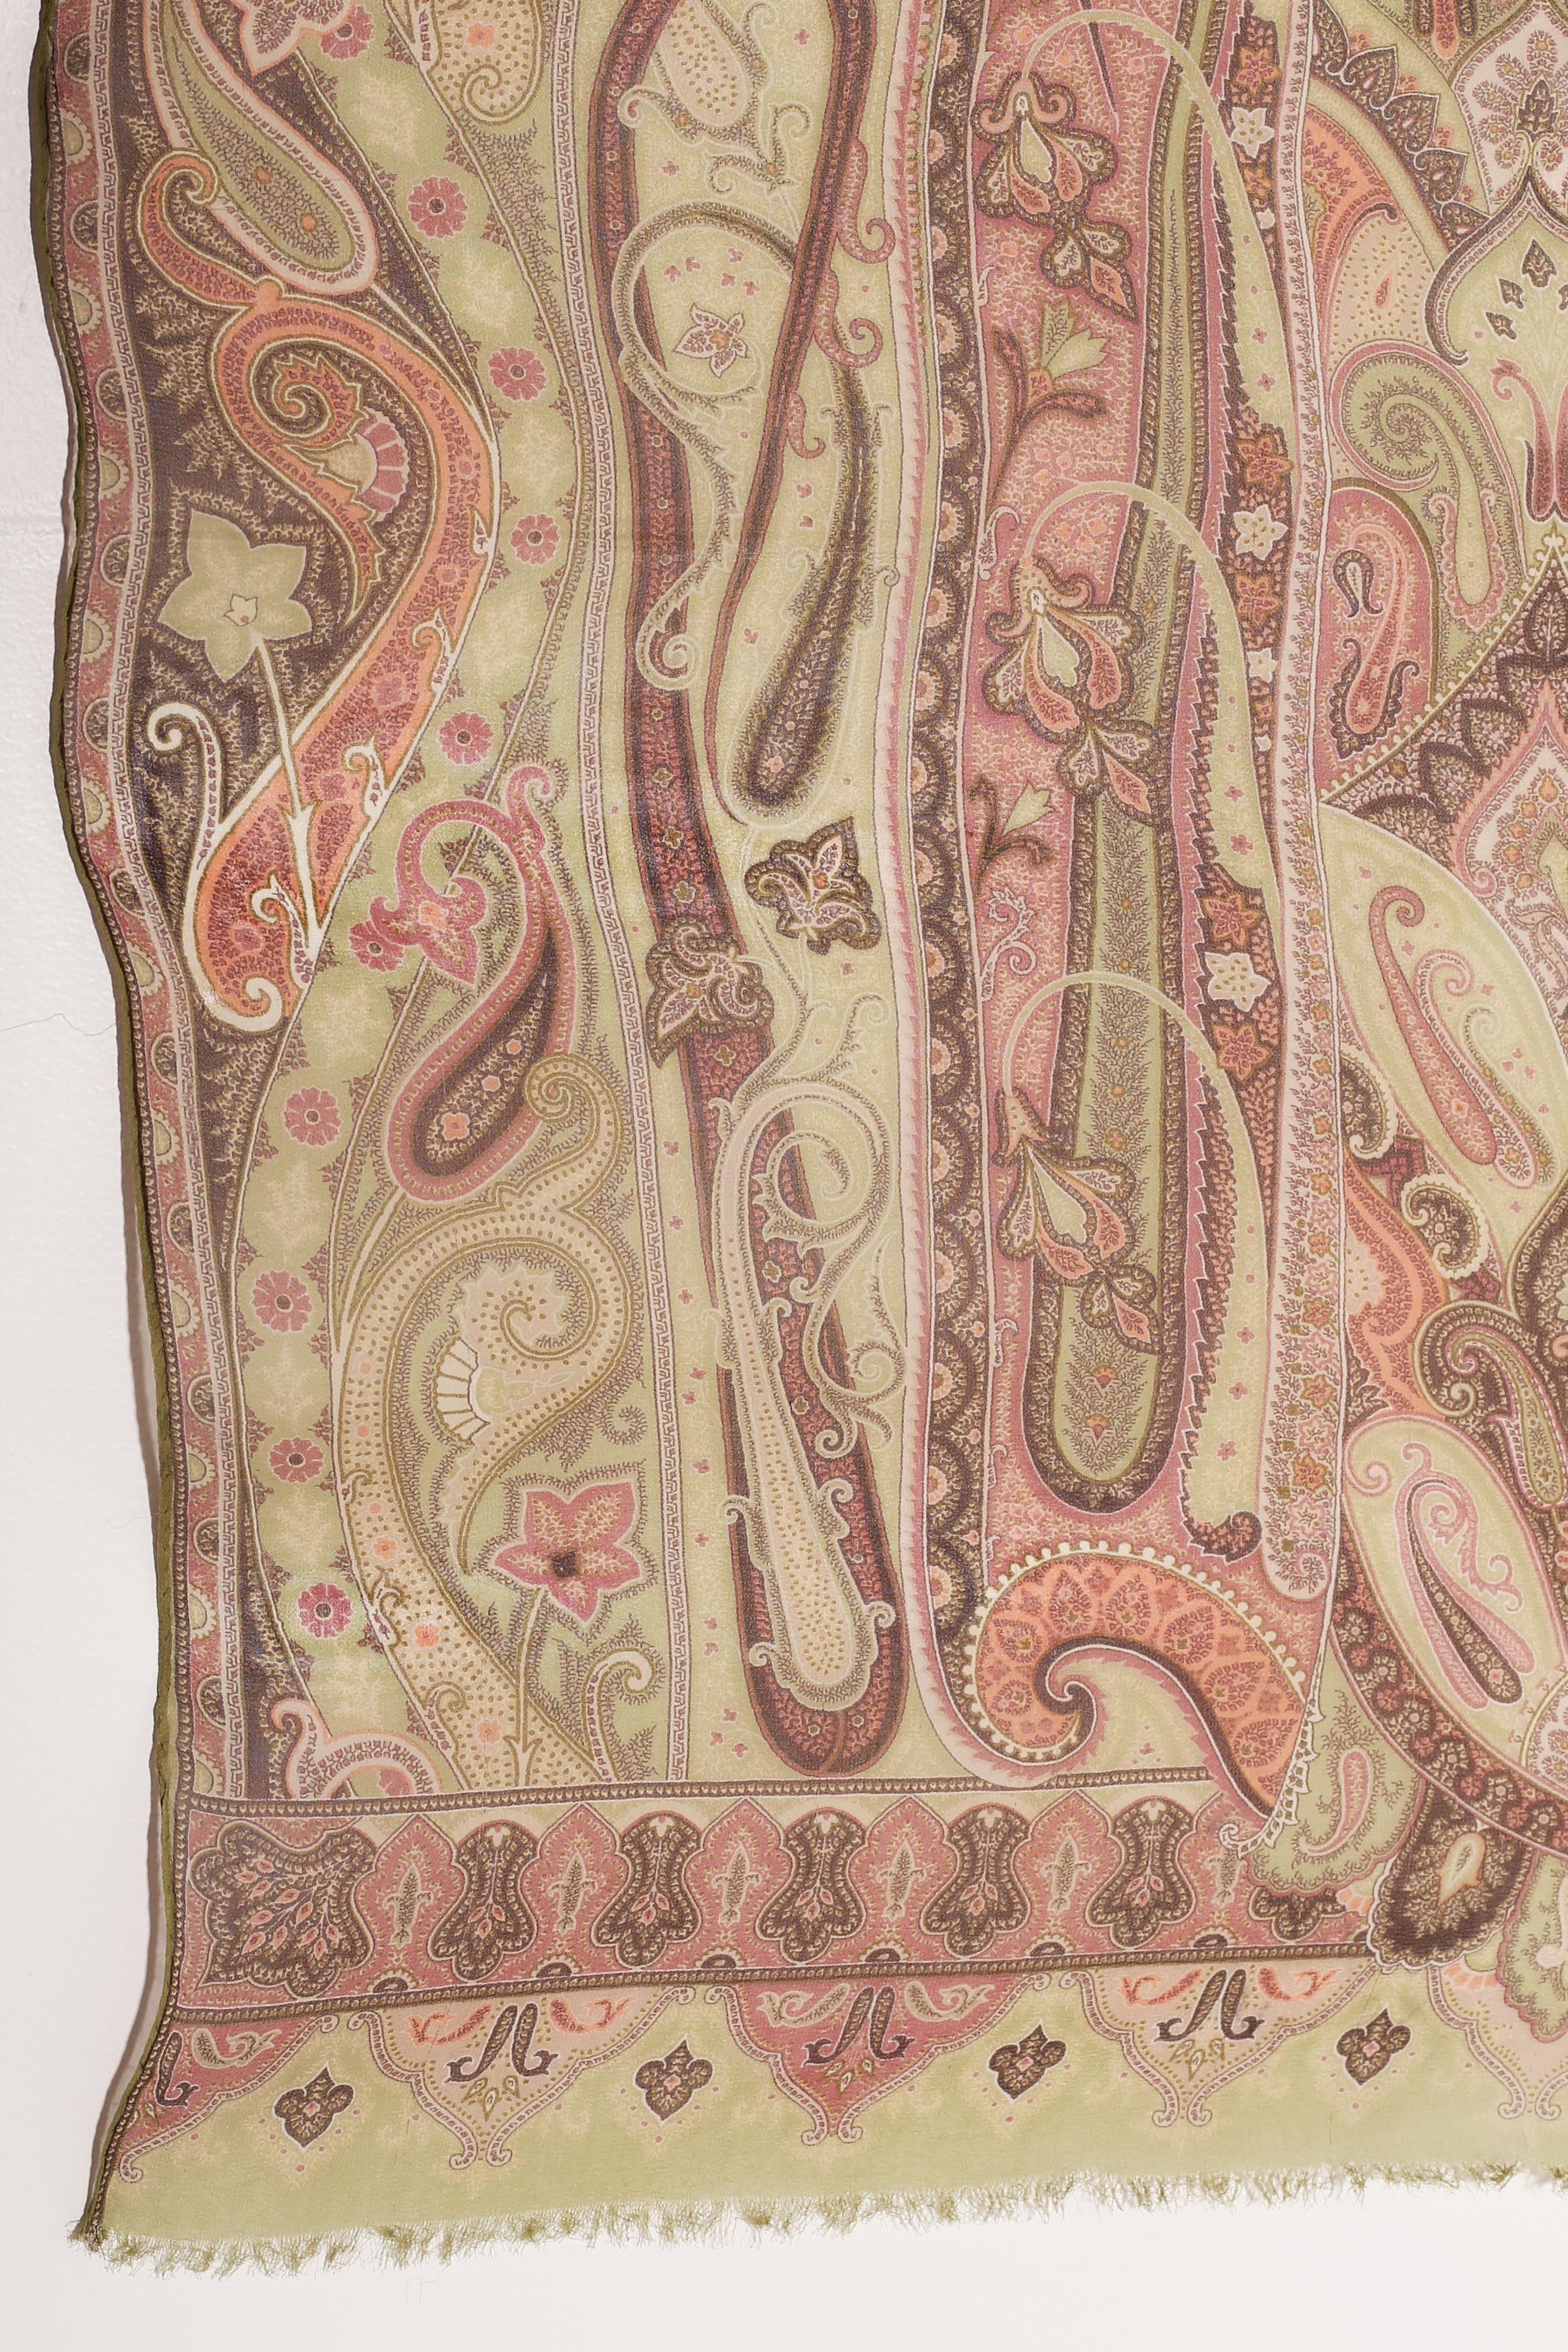  Etro Silk chiffon scarf swirling paisley patters in pastel greens For Sale 1